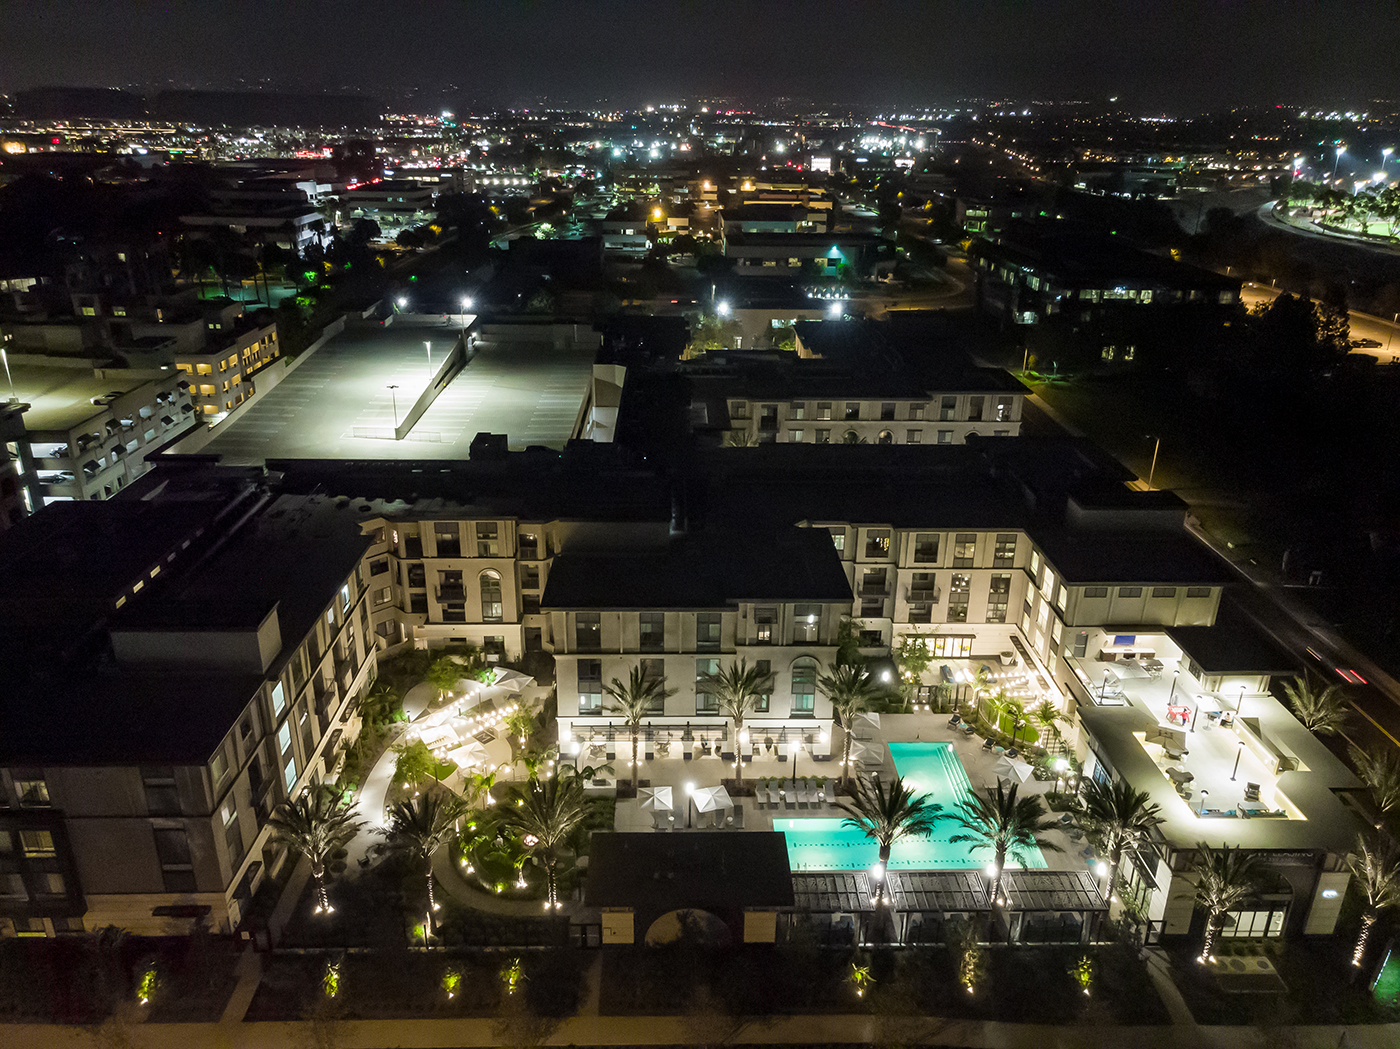 nighttime aerial view of The Murphy apartment community in Irvine, California